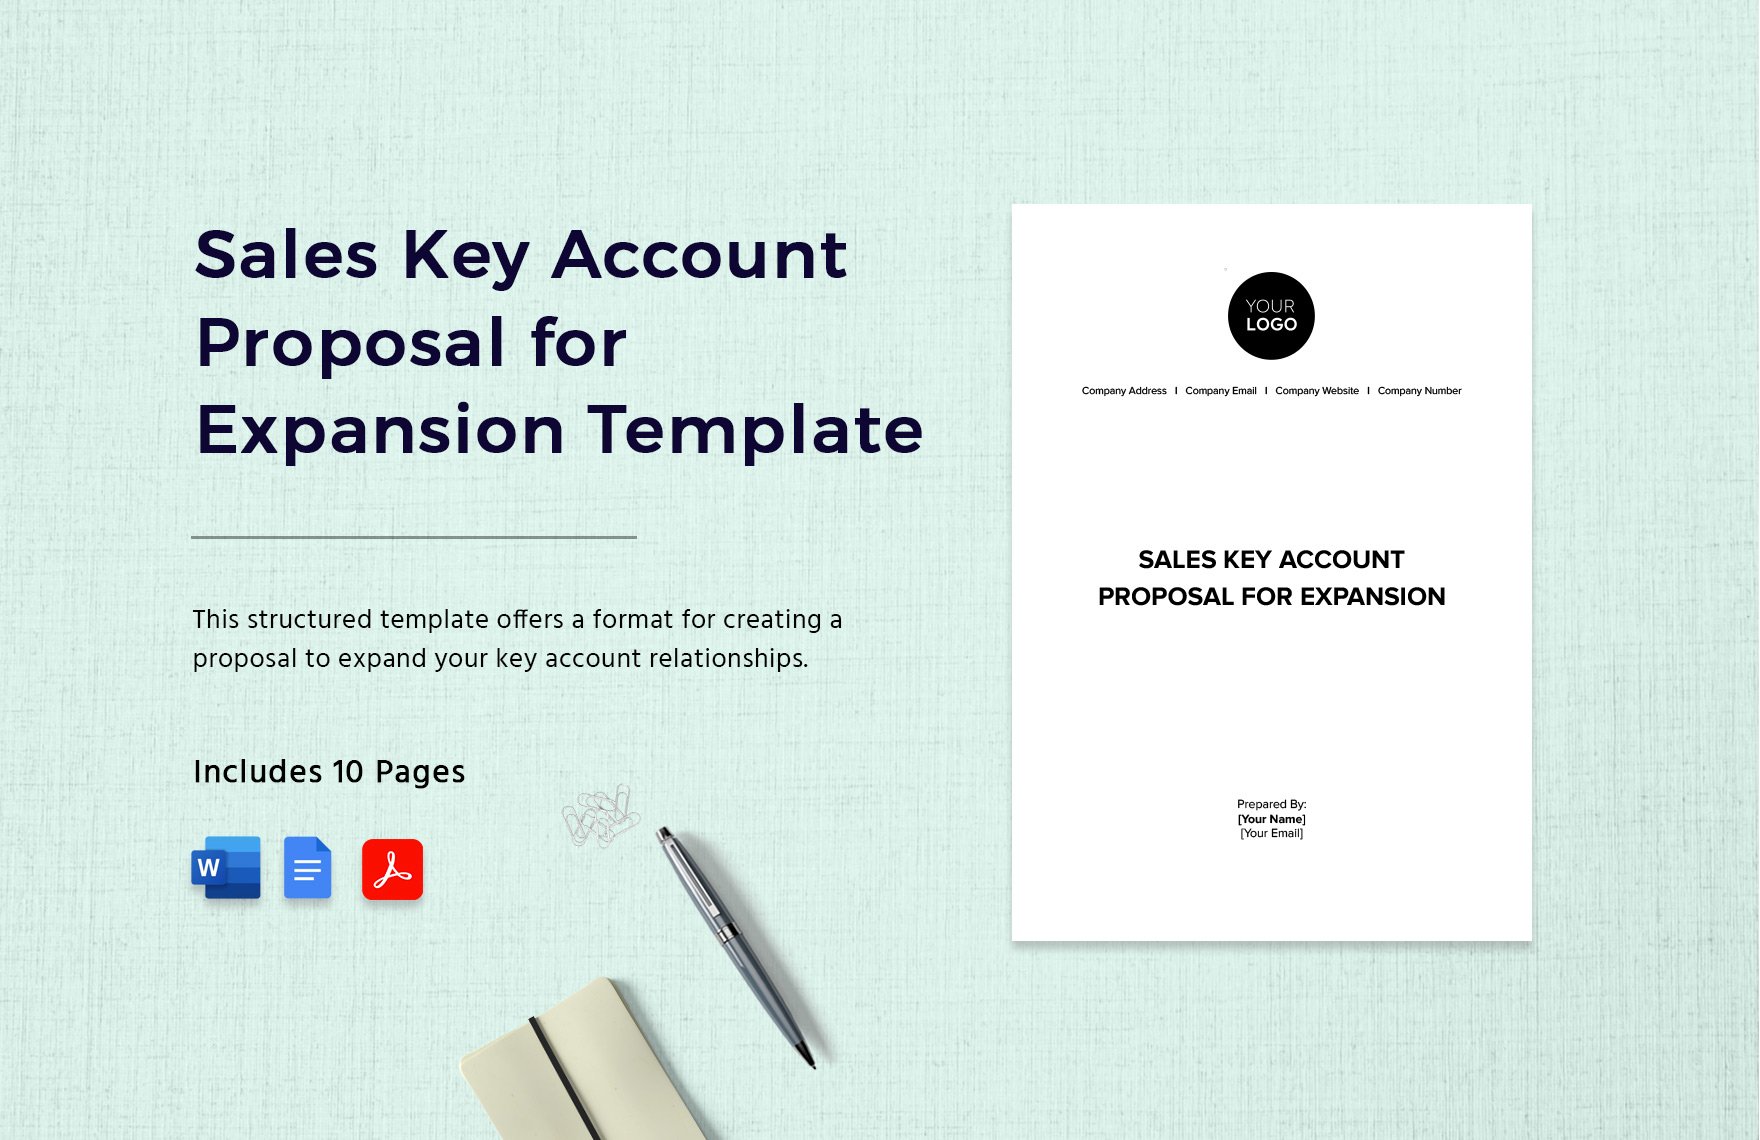 Sales Key Account Proposal for Expansion Template